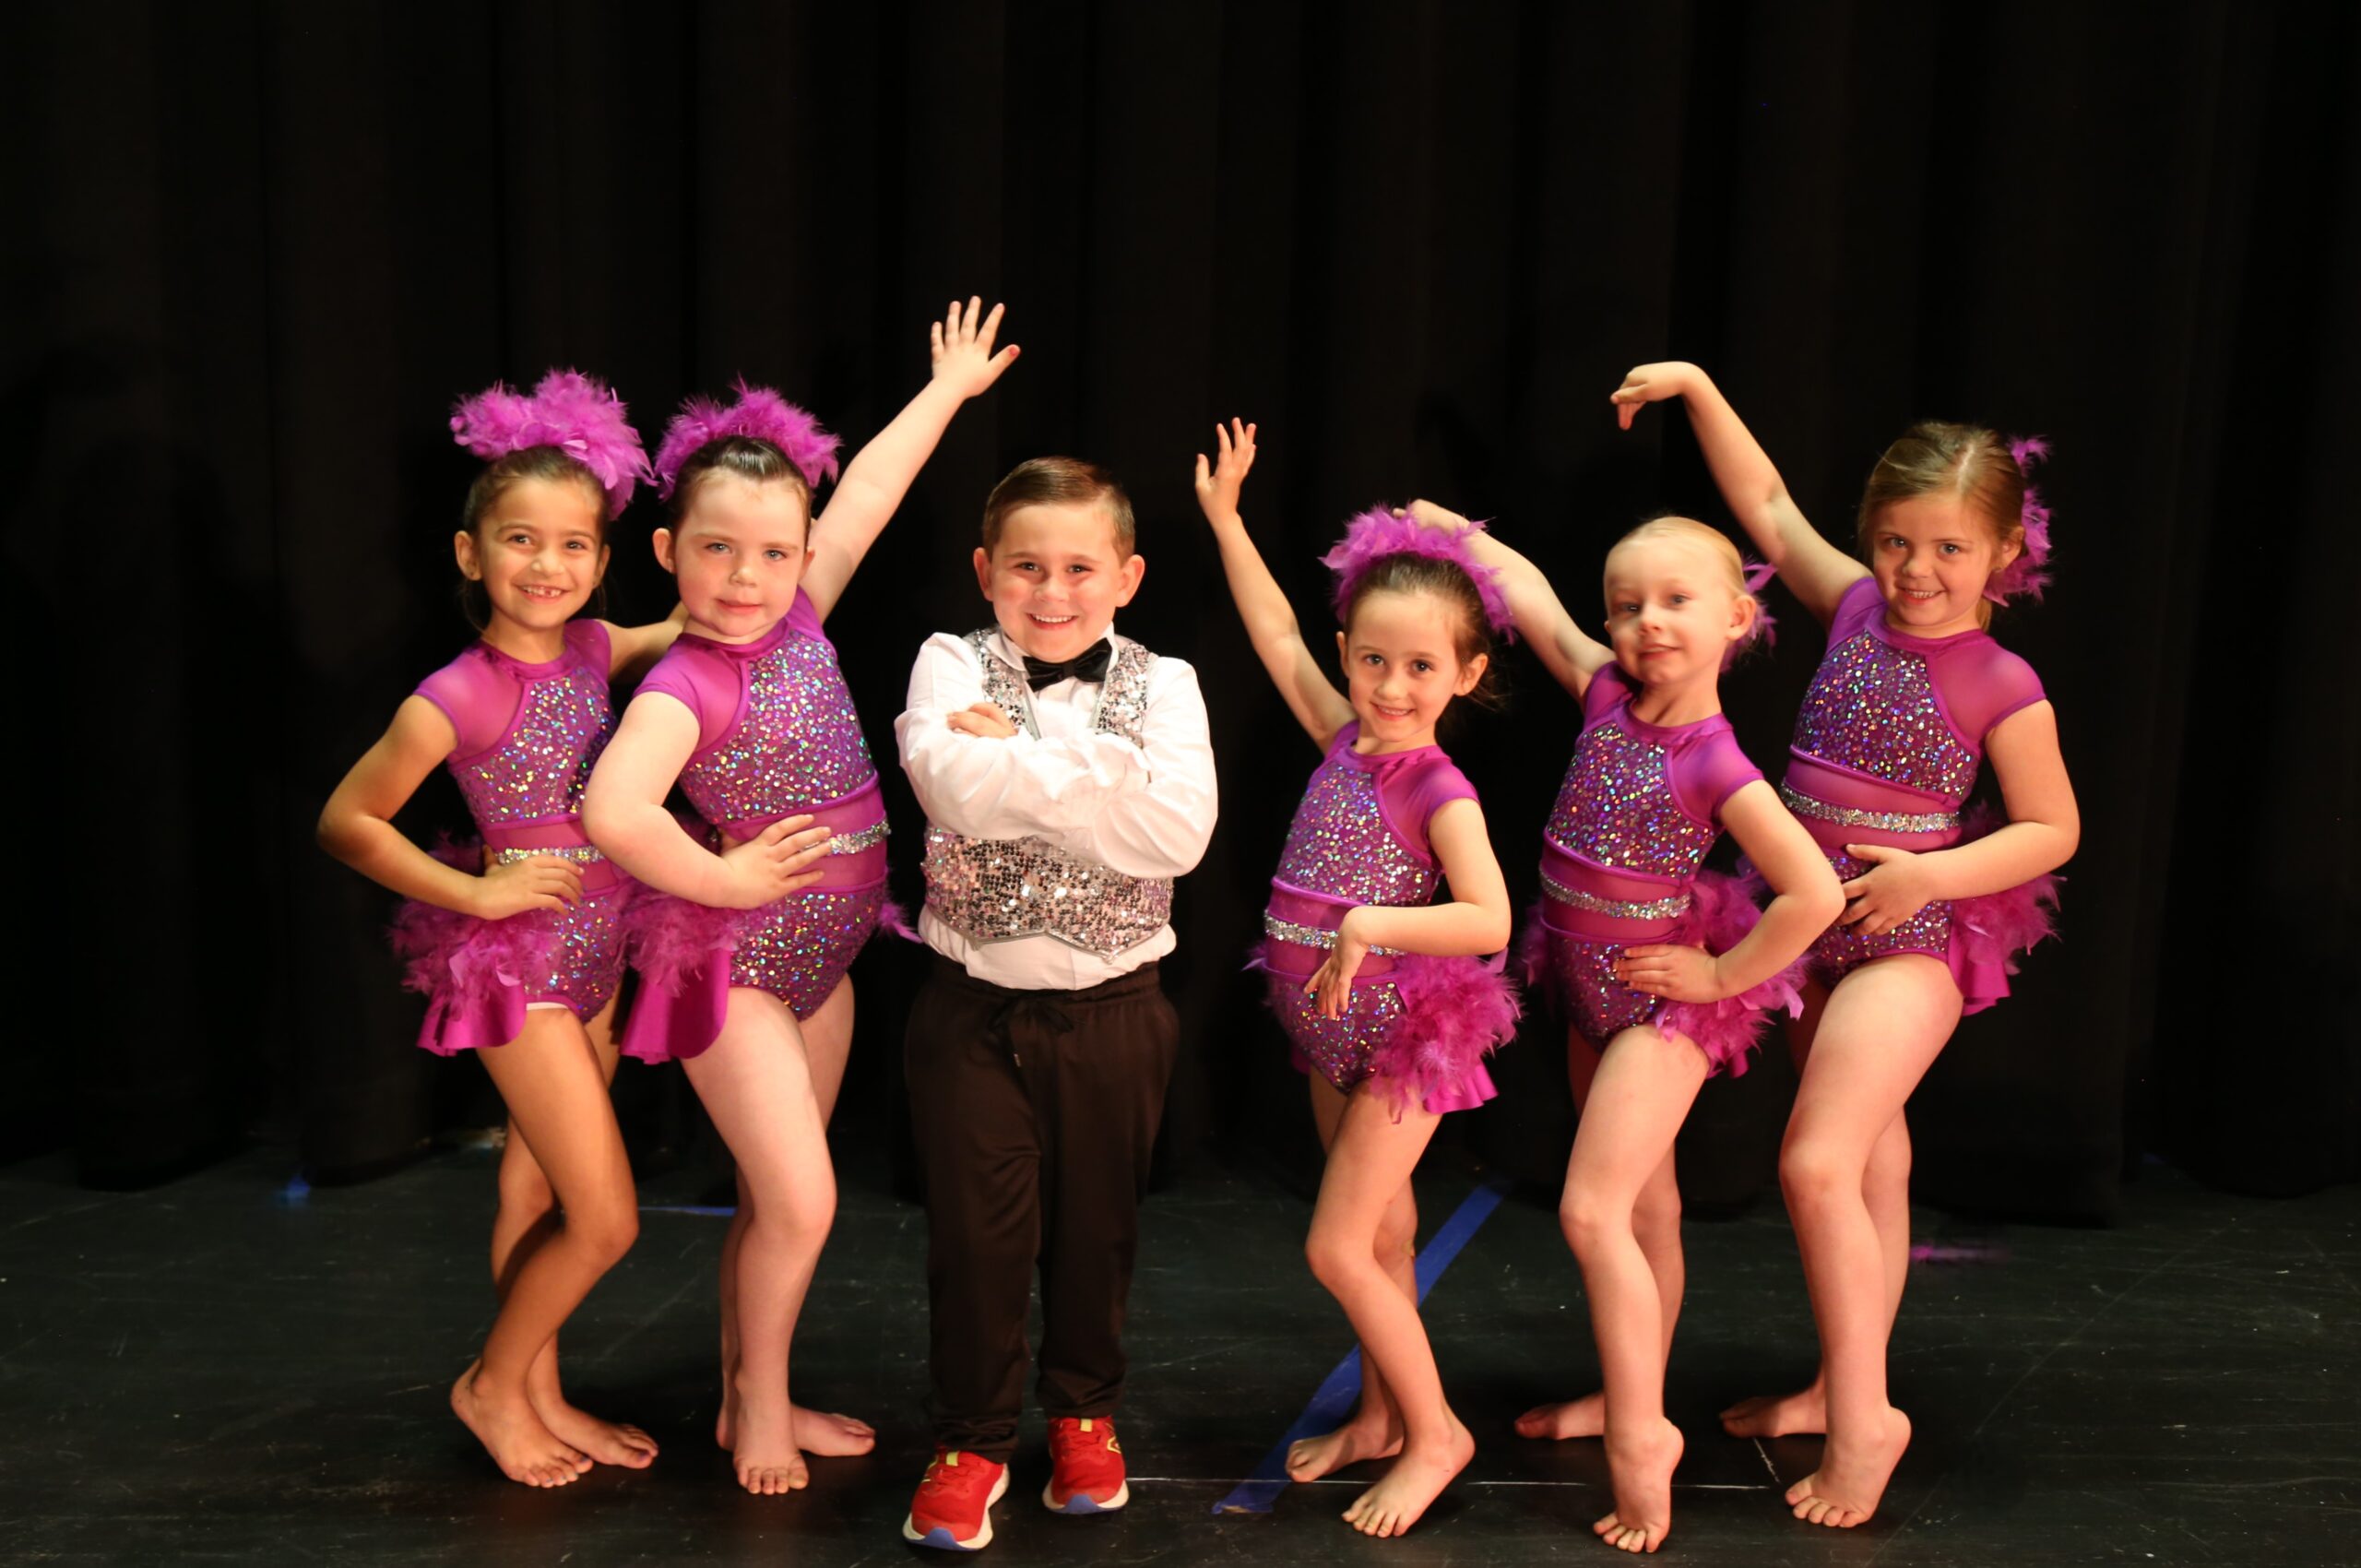 Little Flipsters dance group posing on stage in purple outfits